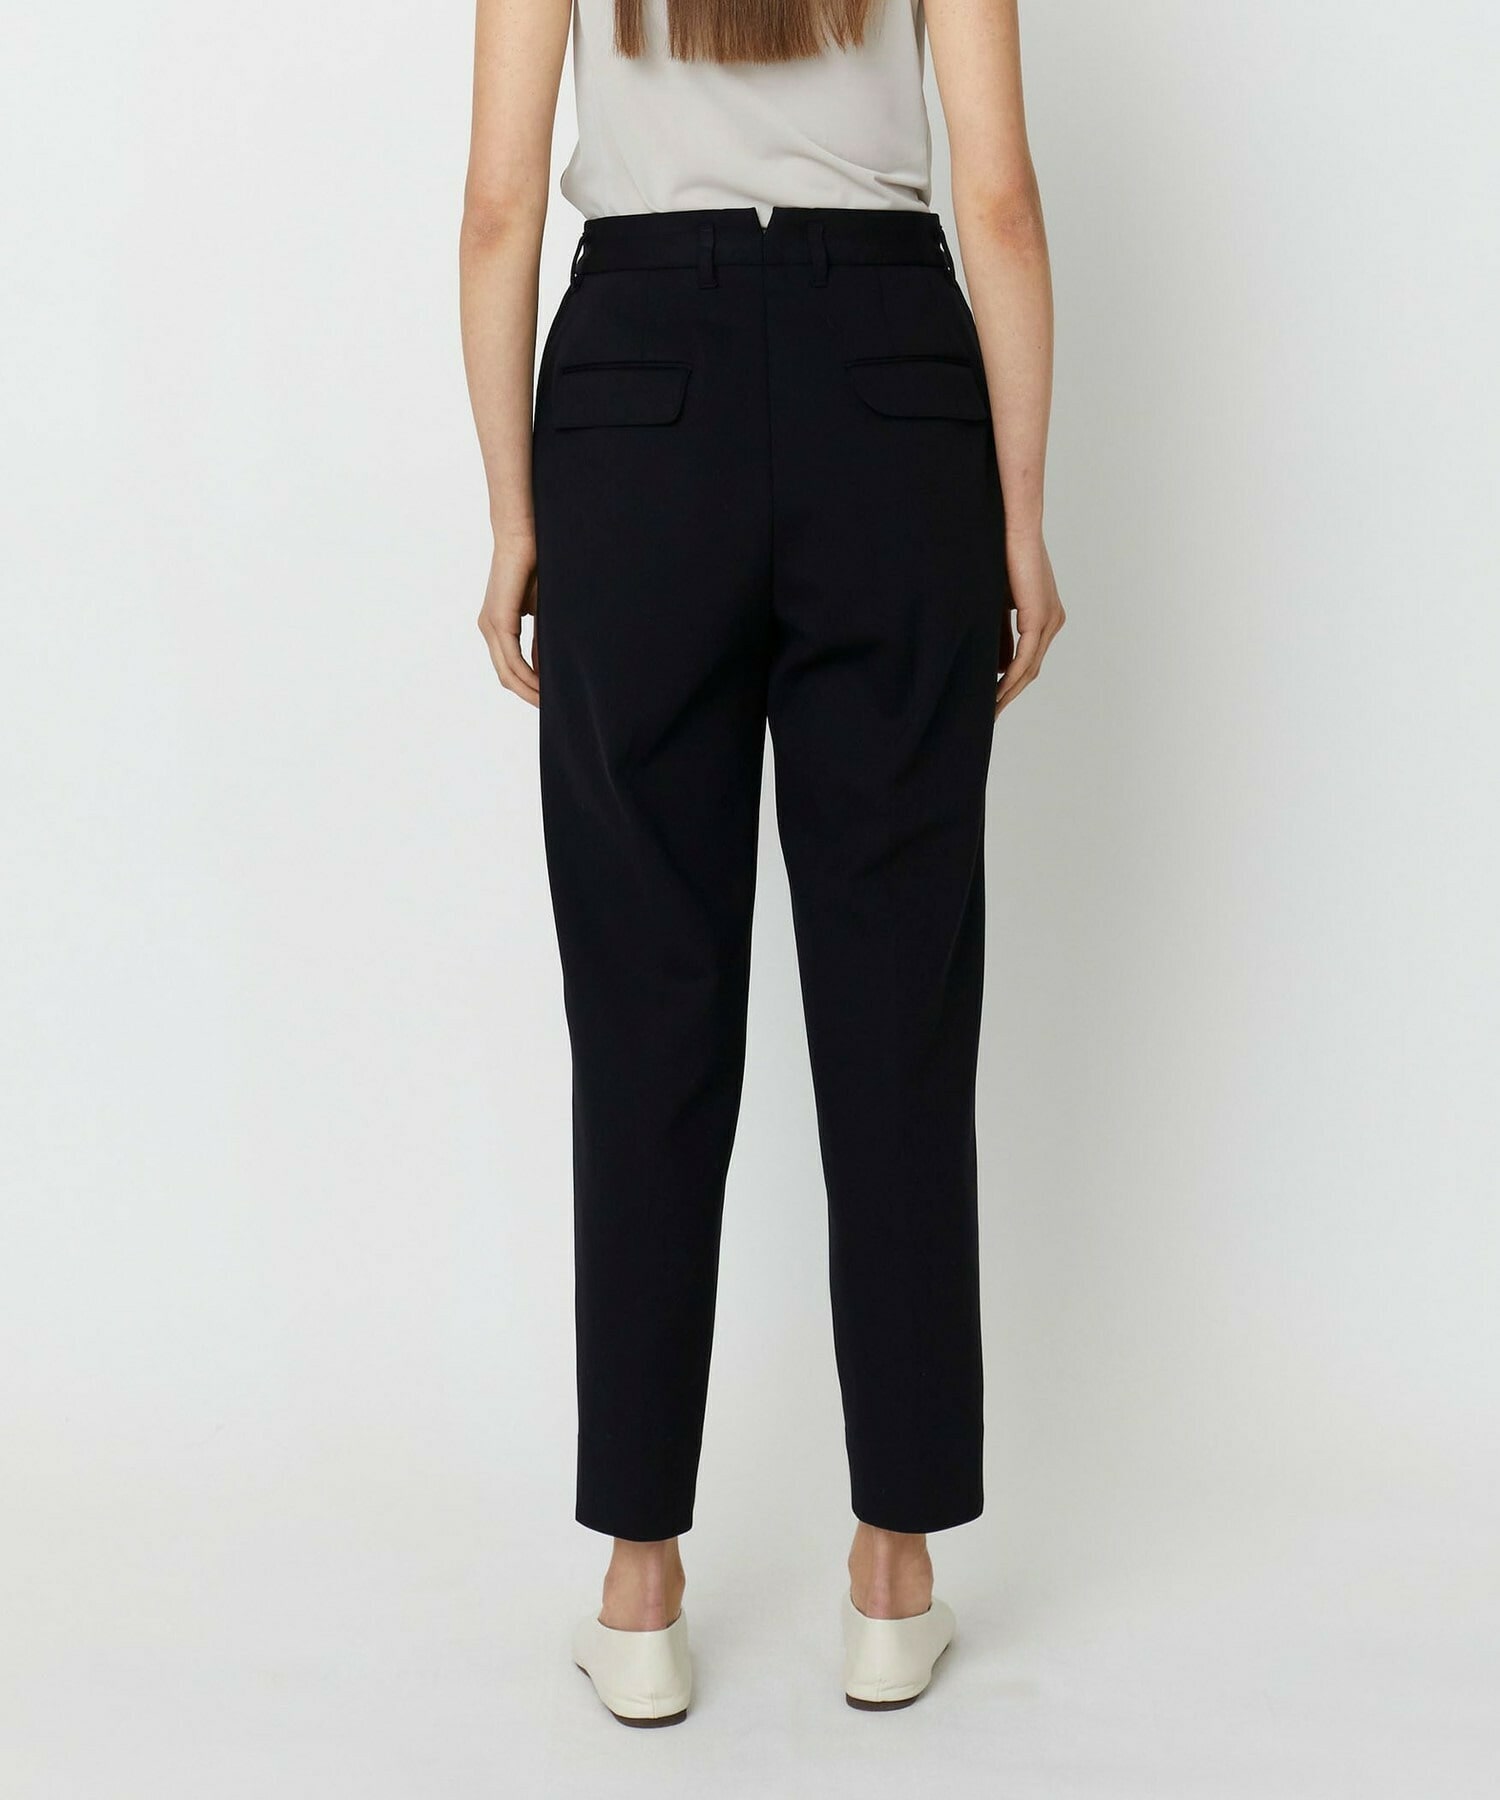 【yoshie inaba】RECYCLE NYLON DOUBLE PLEATED TAPERED  PANTS 詳細画像 ブラック 4